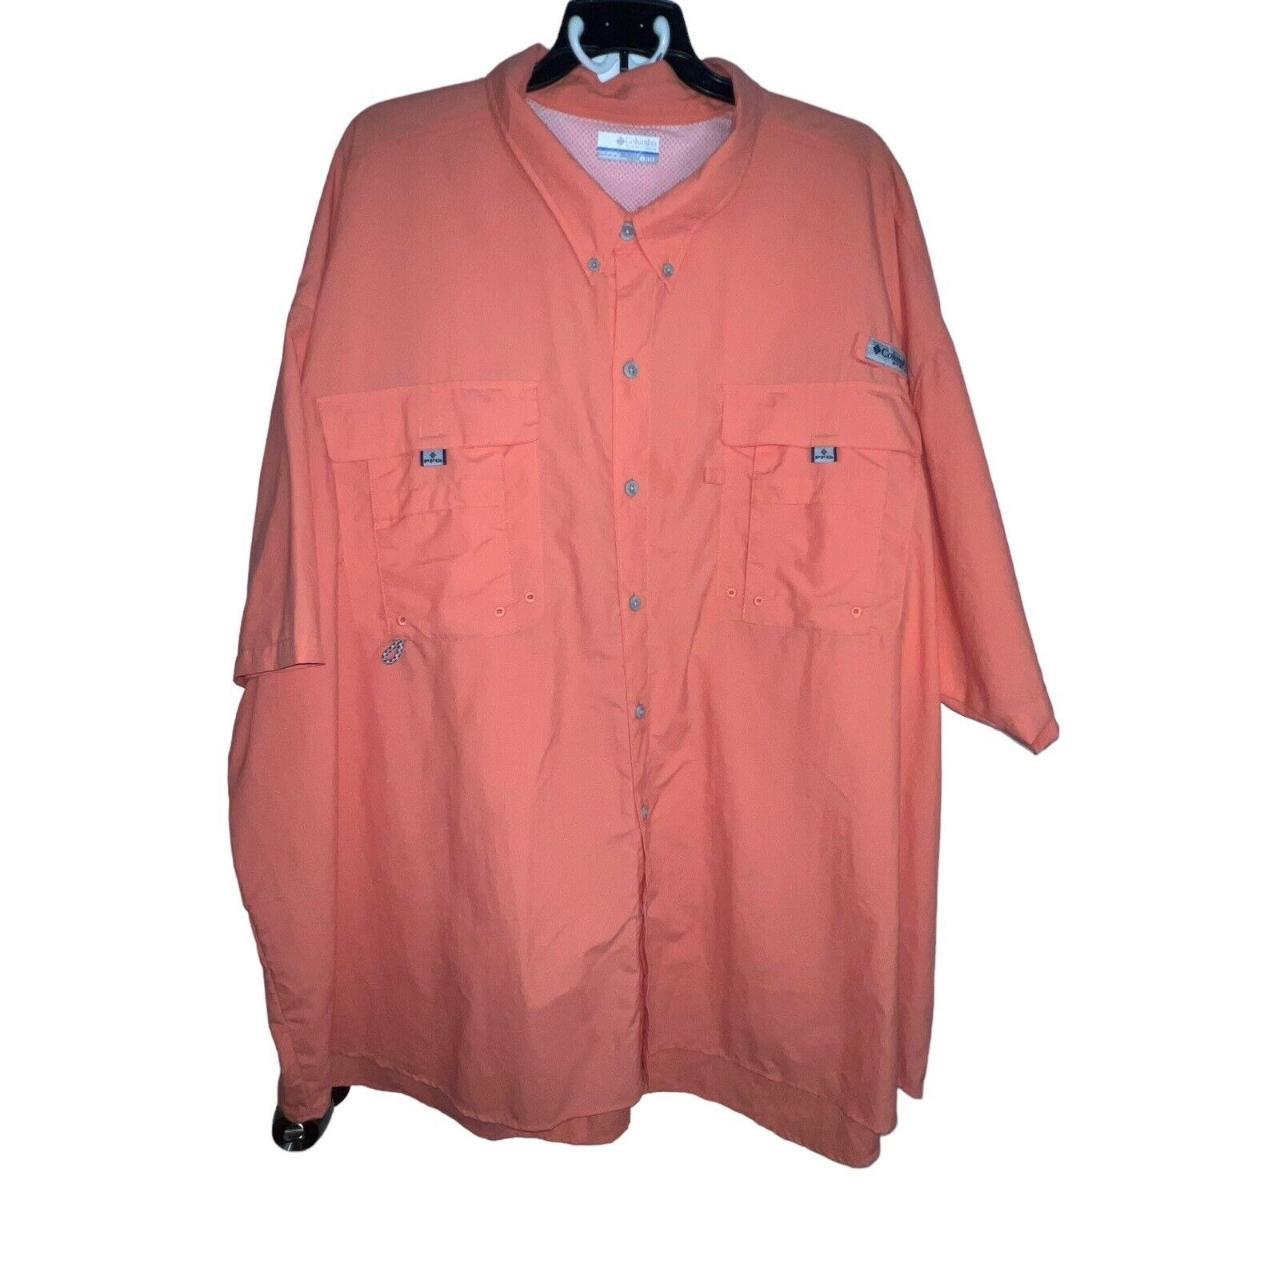 This Columbia PFG button-up shirt is perfect for any - Depop